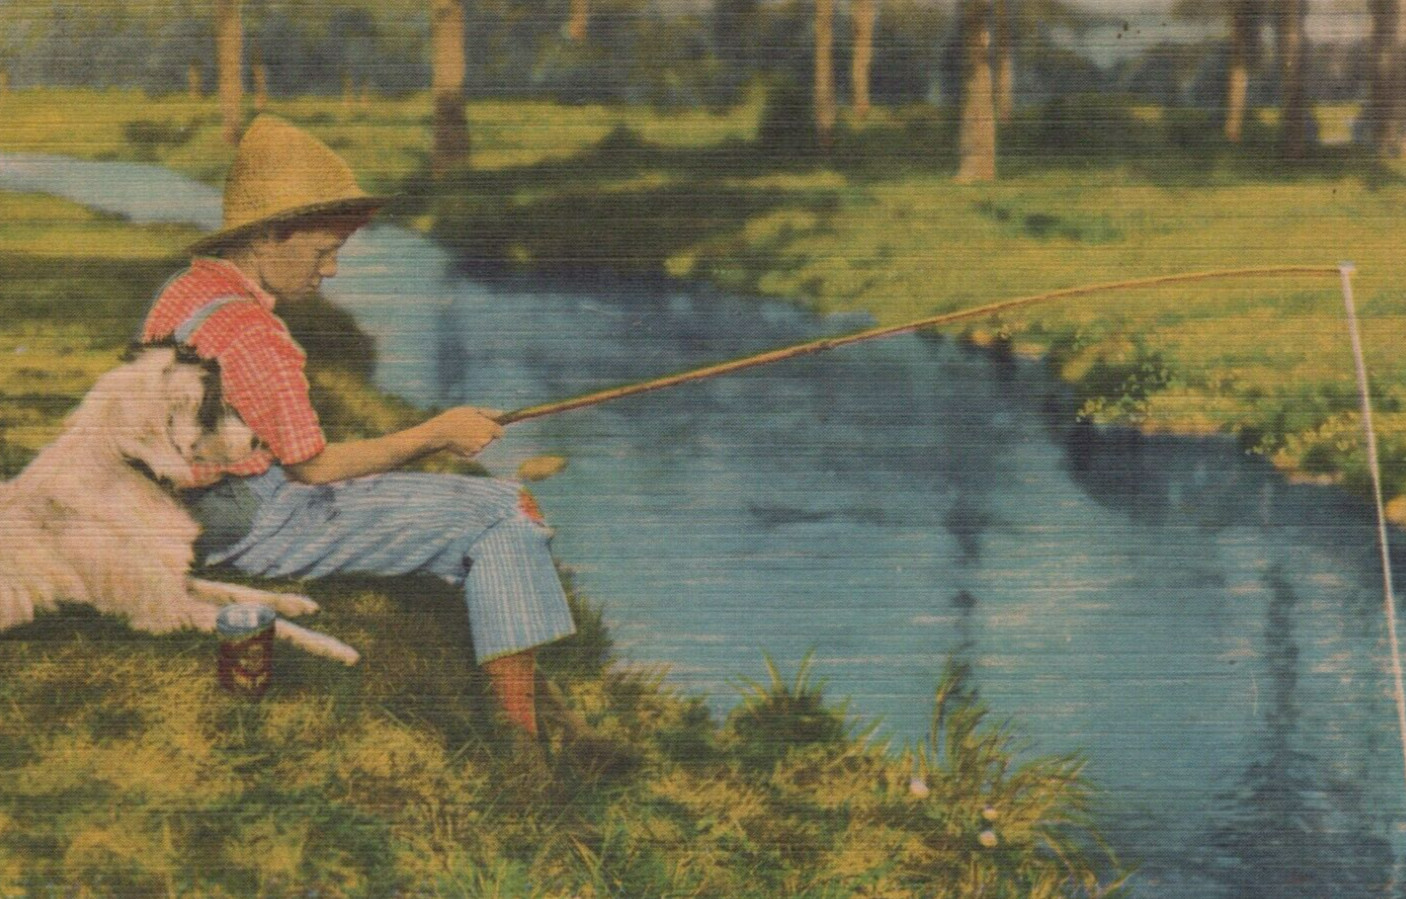 Boy and His Best Friend Fish from a Countryside Creek Linen Vintage Post Card